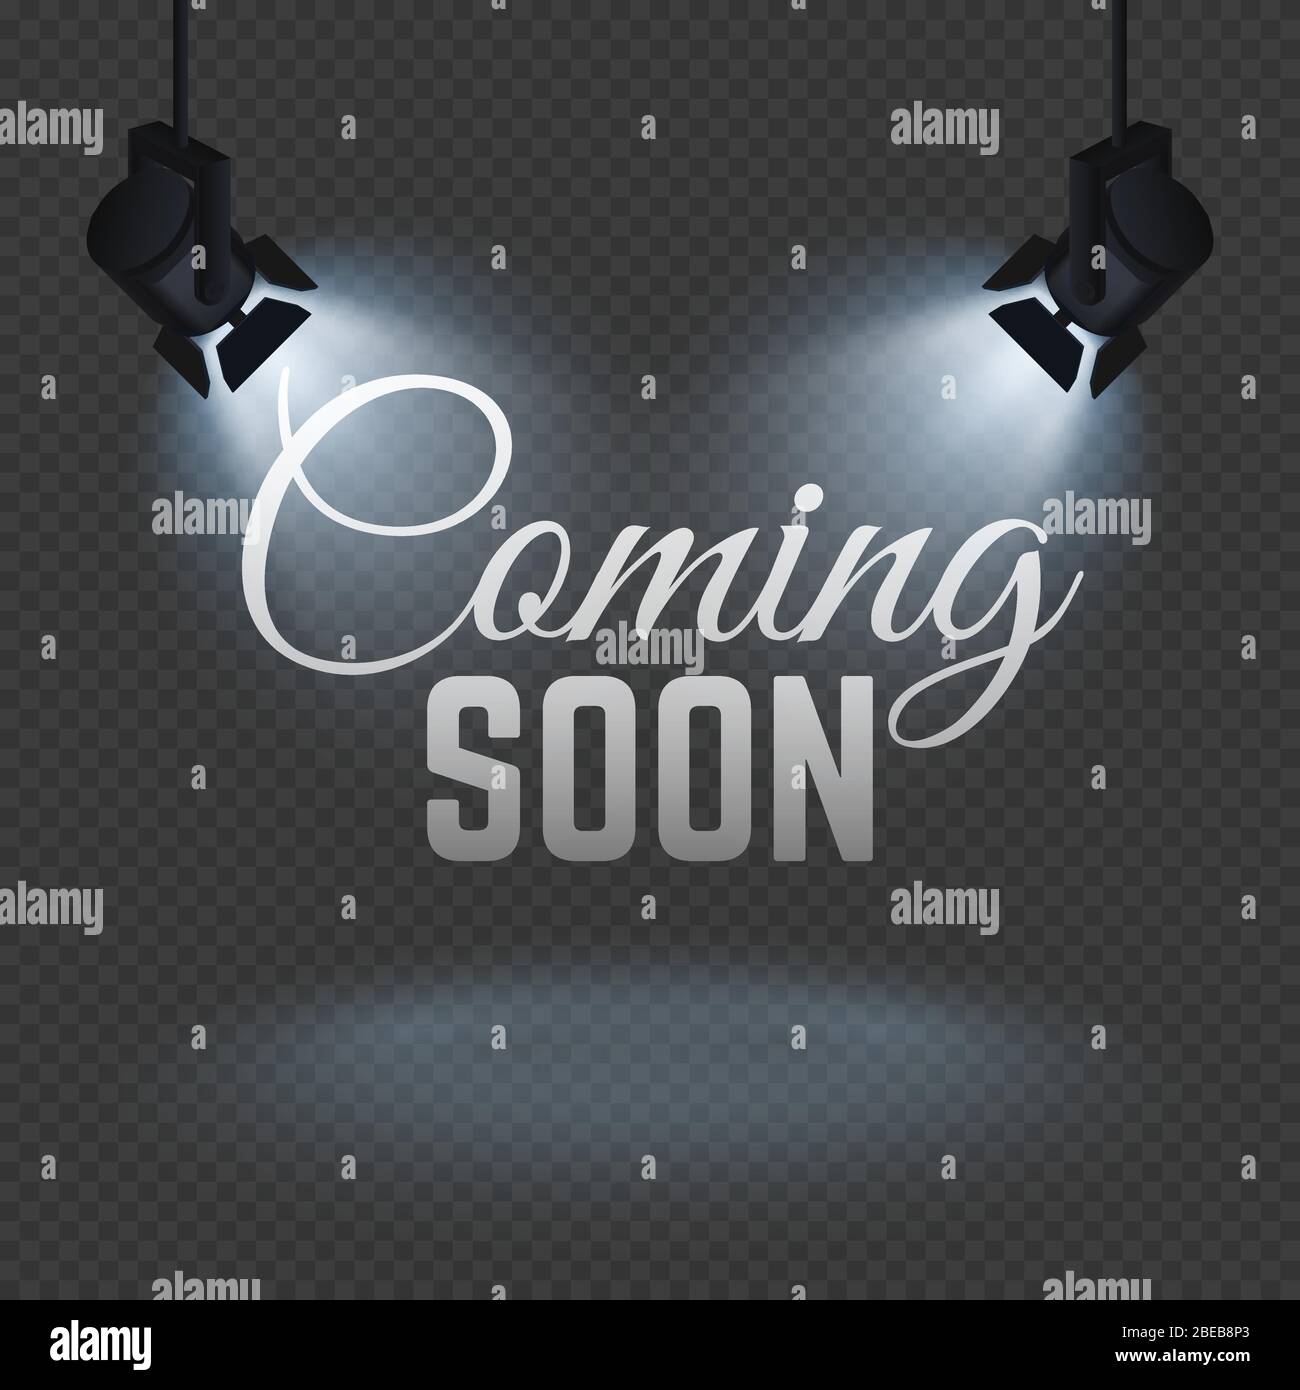 Coming soon concept with spotlights on stage isolated vector illustration Stock Vector